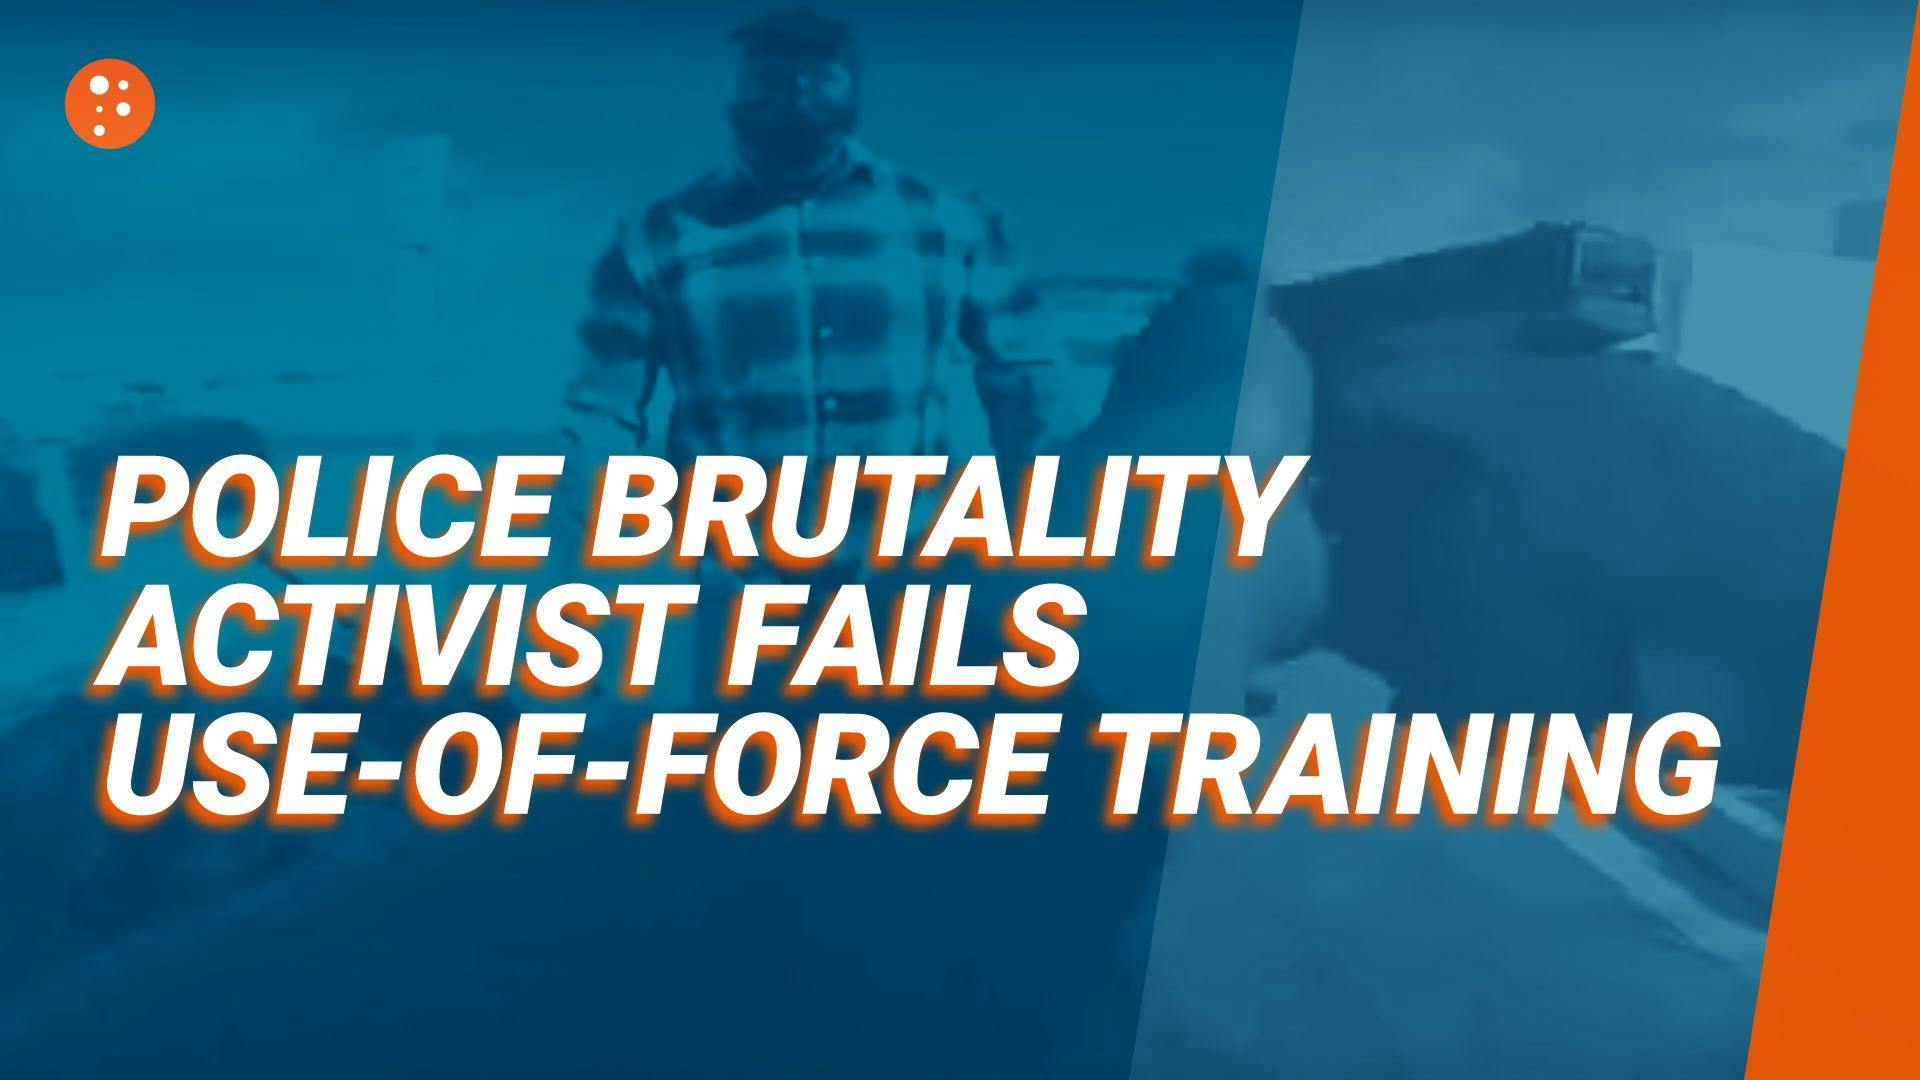 Police Brutality Activist Fails Use-of-Force Training